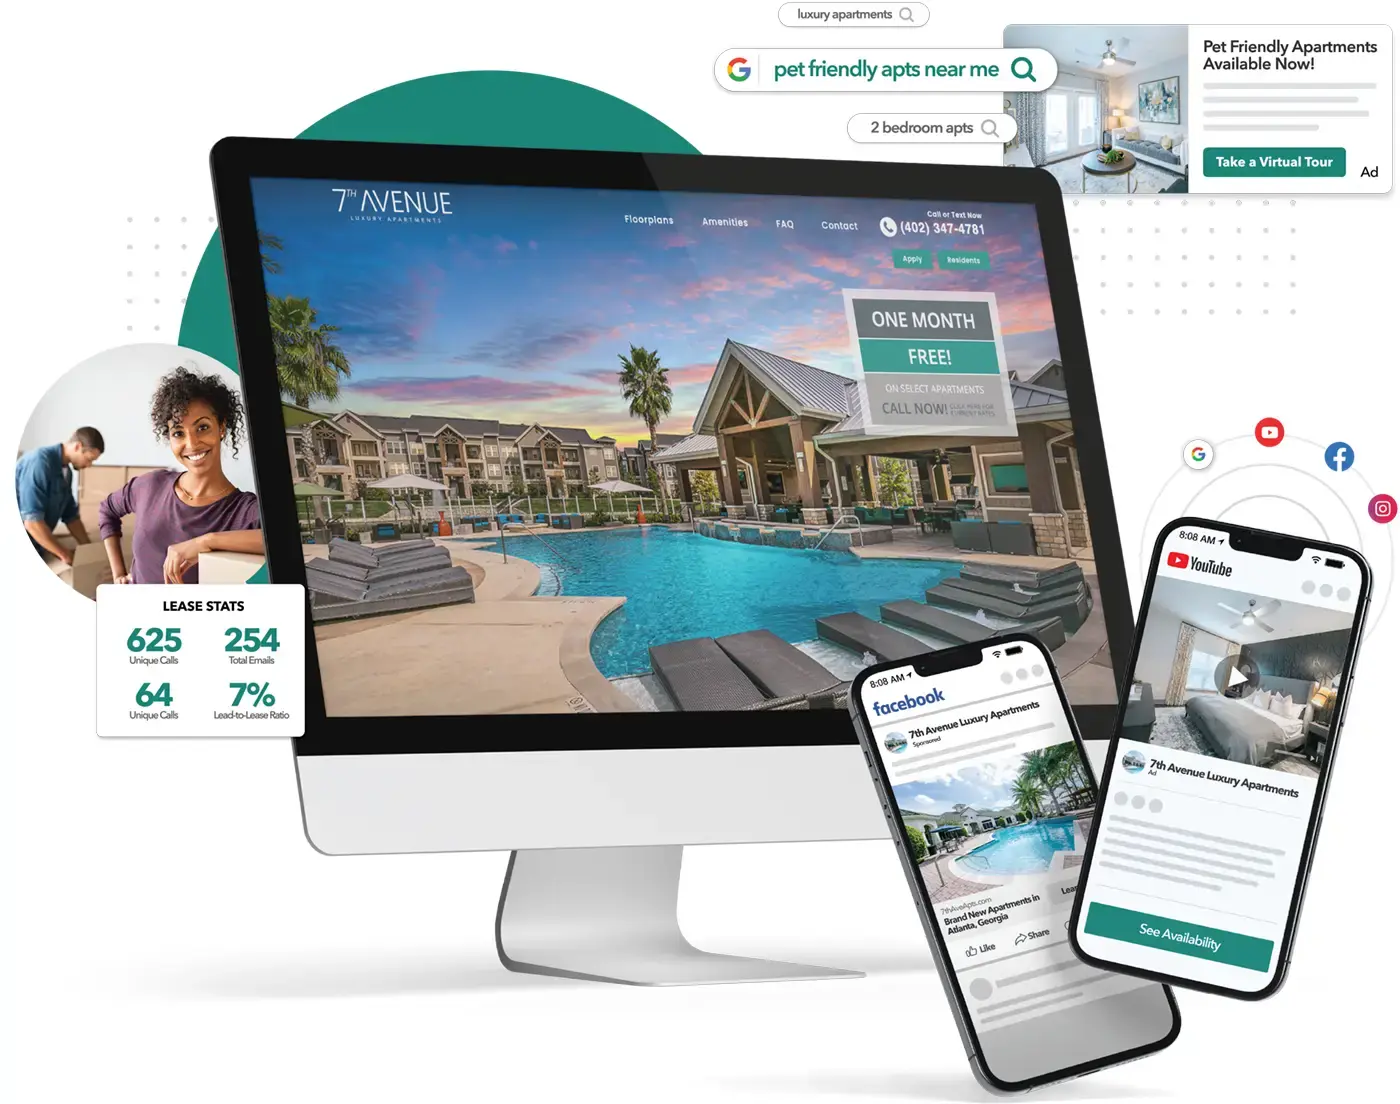 Collage of multifamily marketing solutions; featuring a display showing beautiful, modern community website, digital ads for apartments, search engine marketing terms for apartments, and marketing and leasing stats.